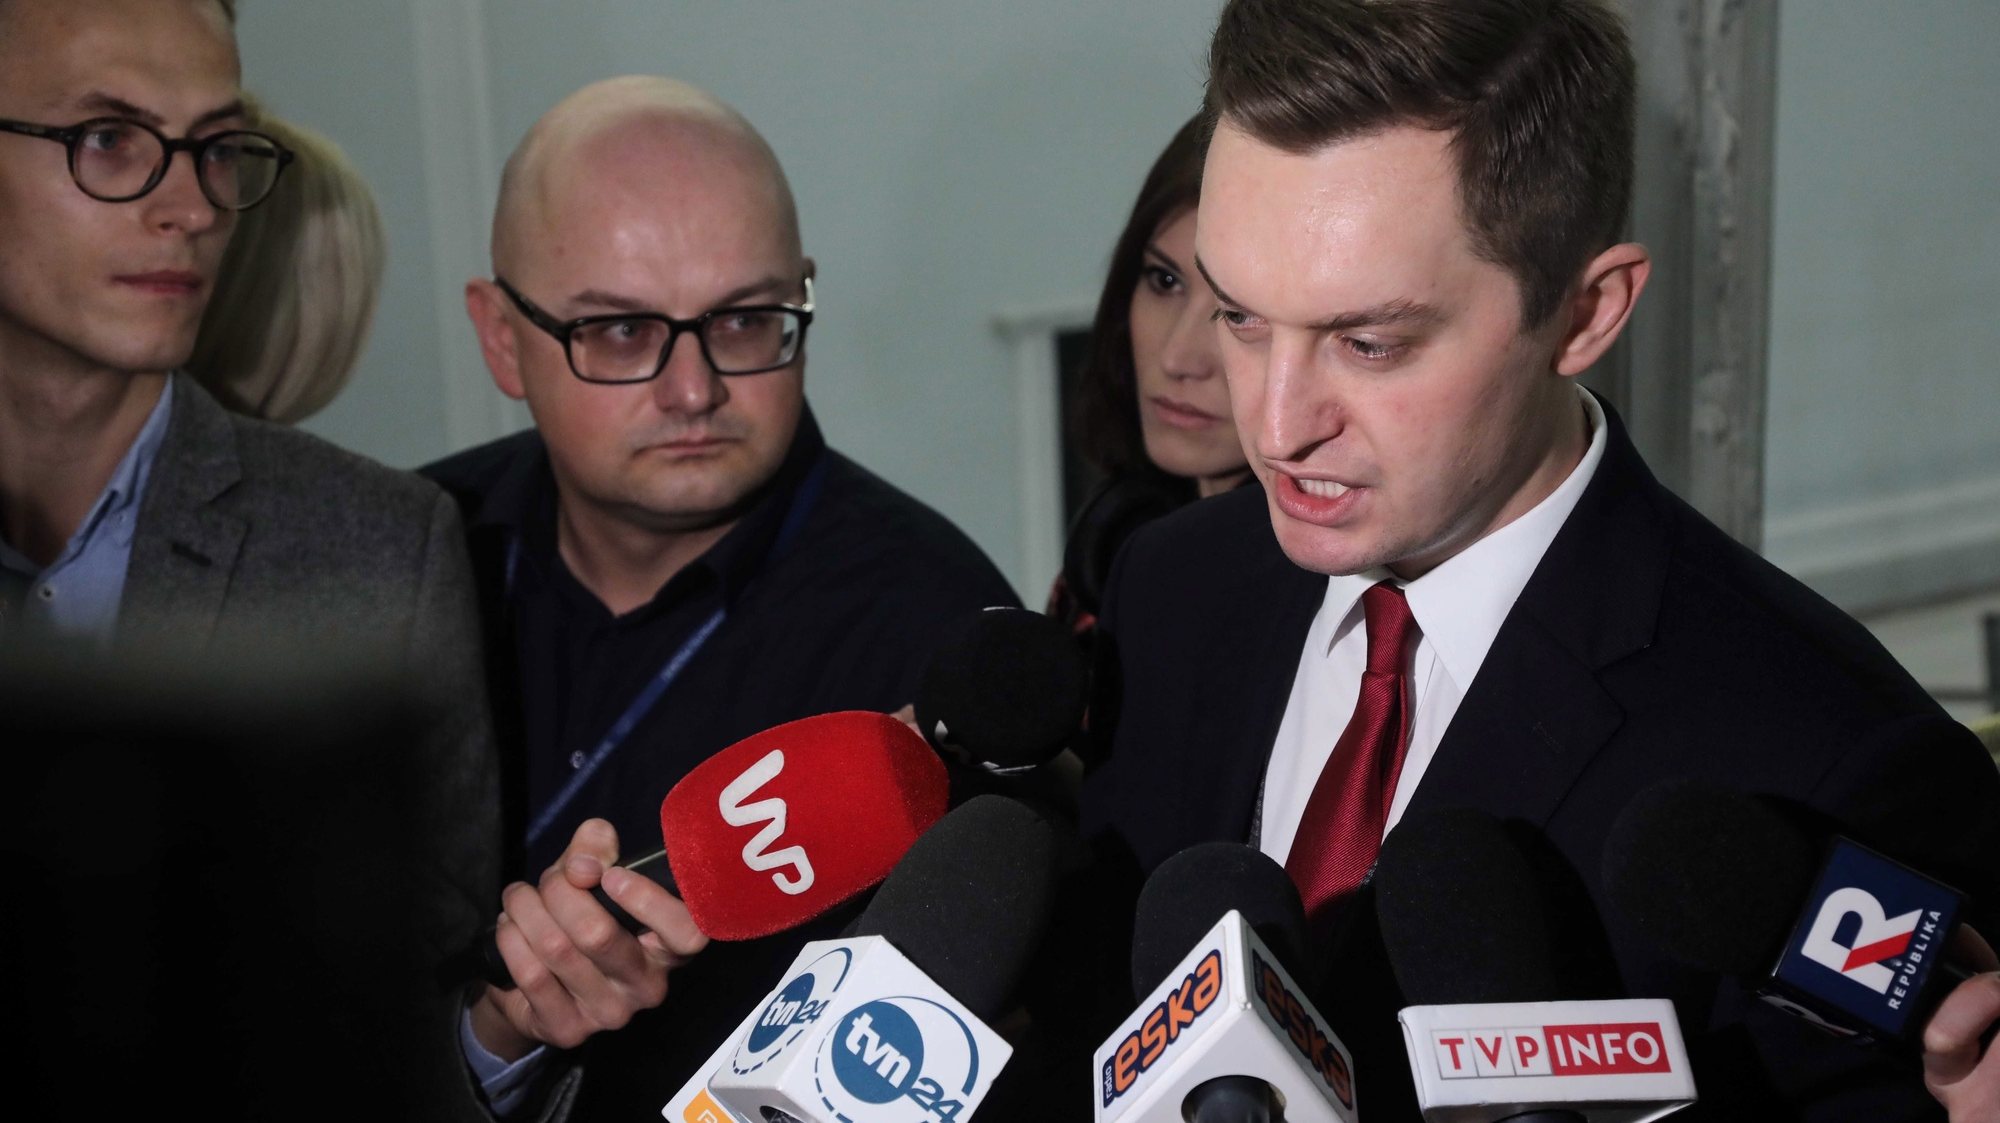 epa08083232 Polish Secretary of State for Justice Sebastian Kaleta (R) talks with journalists before the parliamentary debate on the new judiciary bill in Sejm (lower house) in Warsaw, Poland, 20 December 2019. Last week, MPs from Law and Justice (PiS) submitted a comprehensive draft amendment to provisions relating to the courts and Supreme Court, as well as to administrative and military courts, and prosecutors. According to the authors of the legislation, the new solutions were intended to discipline judges who exceeded their powers. Opponents of the bill warned that the new legislation violates judicial independence.  EPA/WOJCIECH OLKUSNIK POLAND OUT